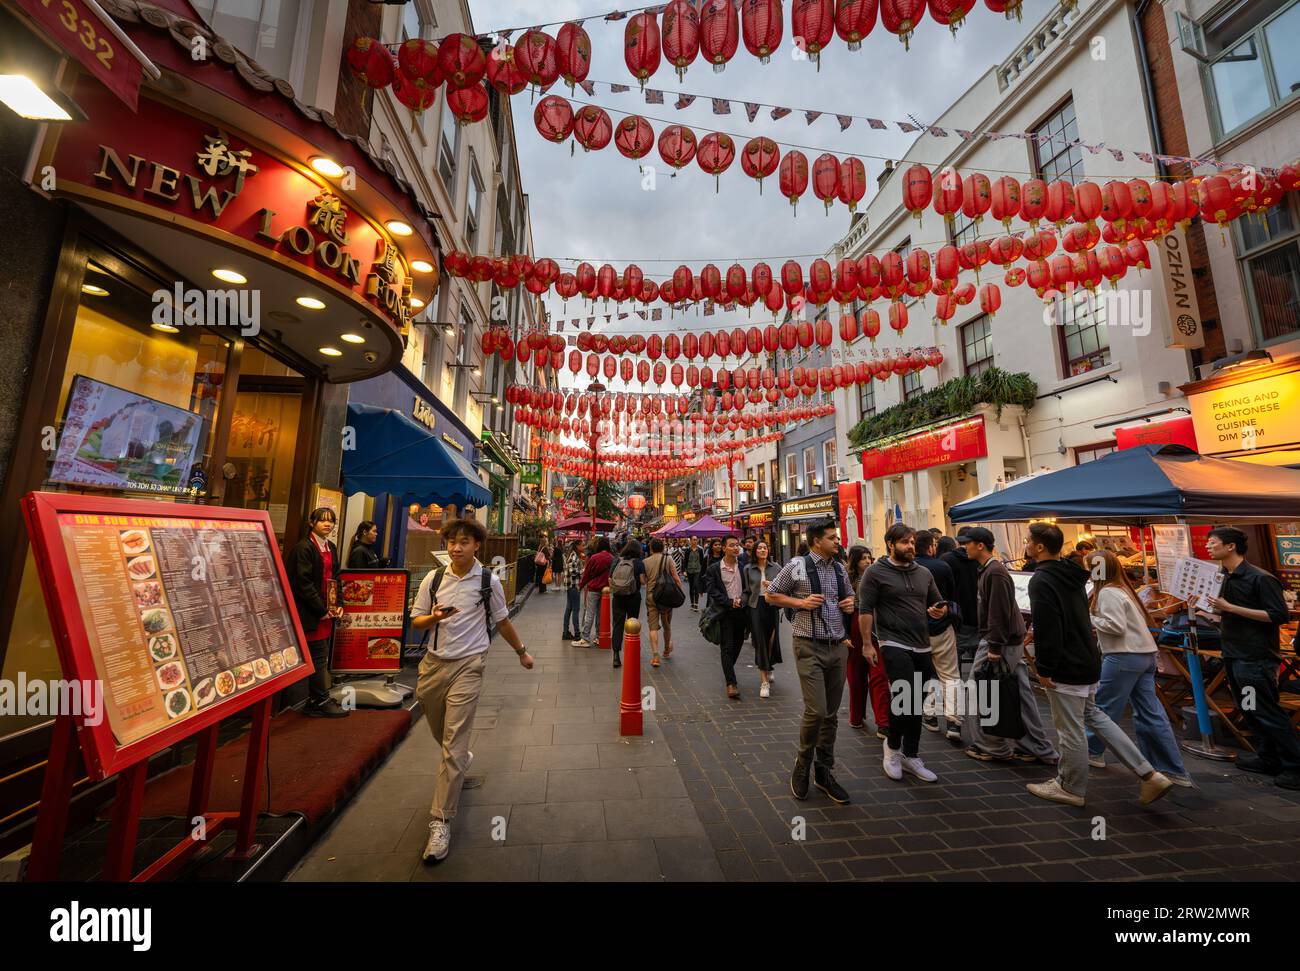 London, UK: Gerard Street in London's Chinatown. Tourist street in central London with Chinese restaurants and red Chinese lanterns. Stock Photo